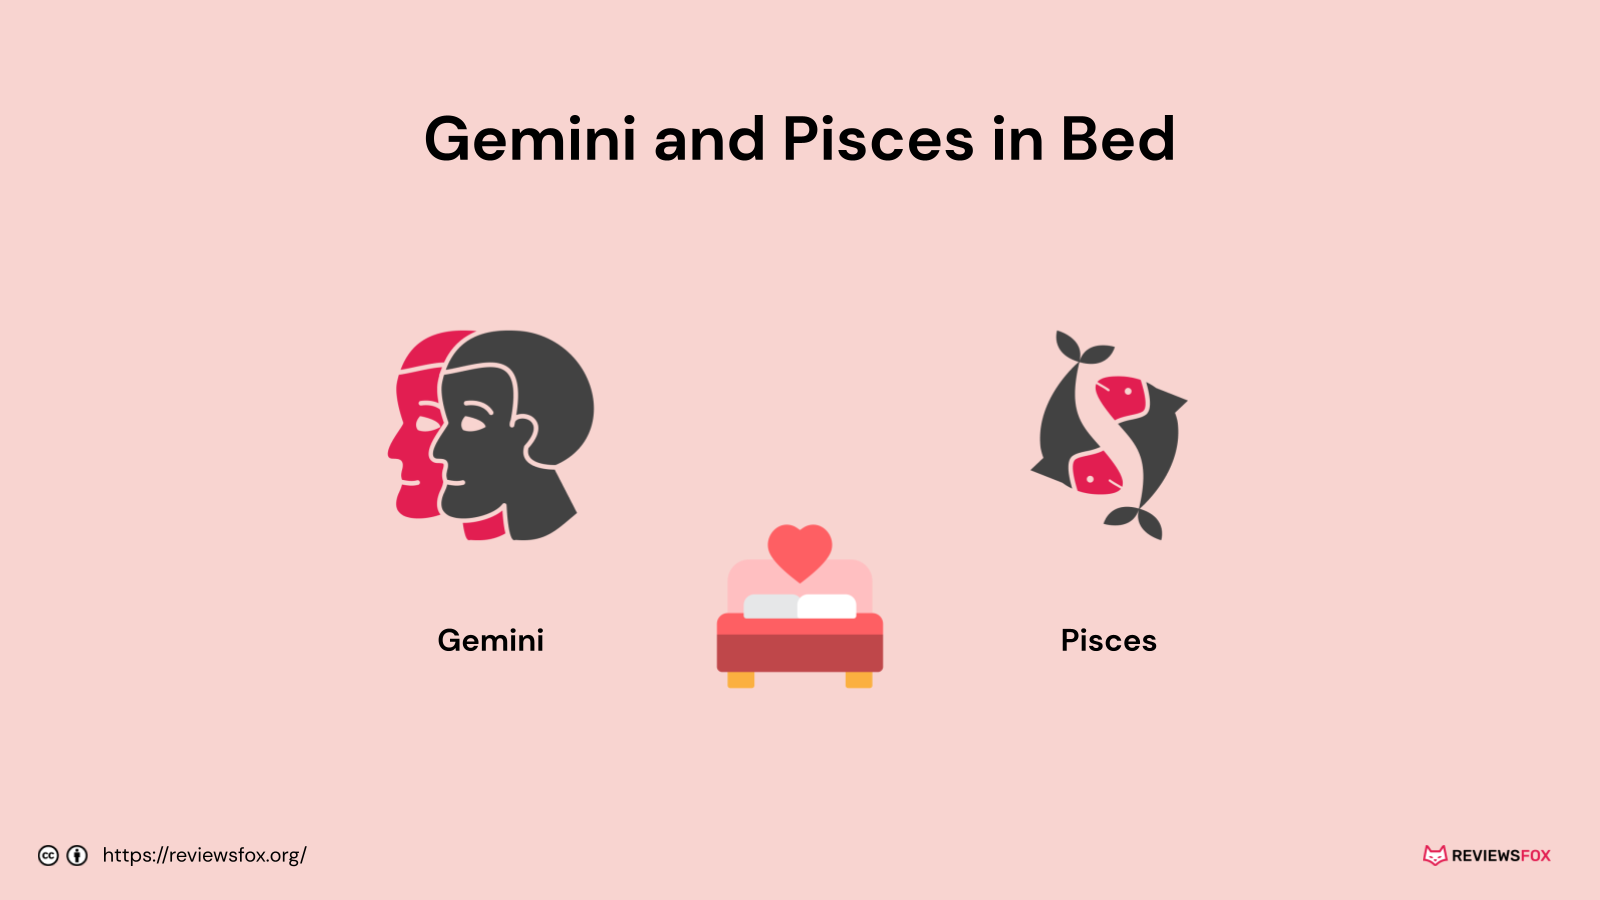 Gemini and Pisces in bed